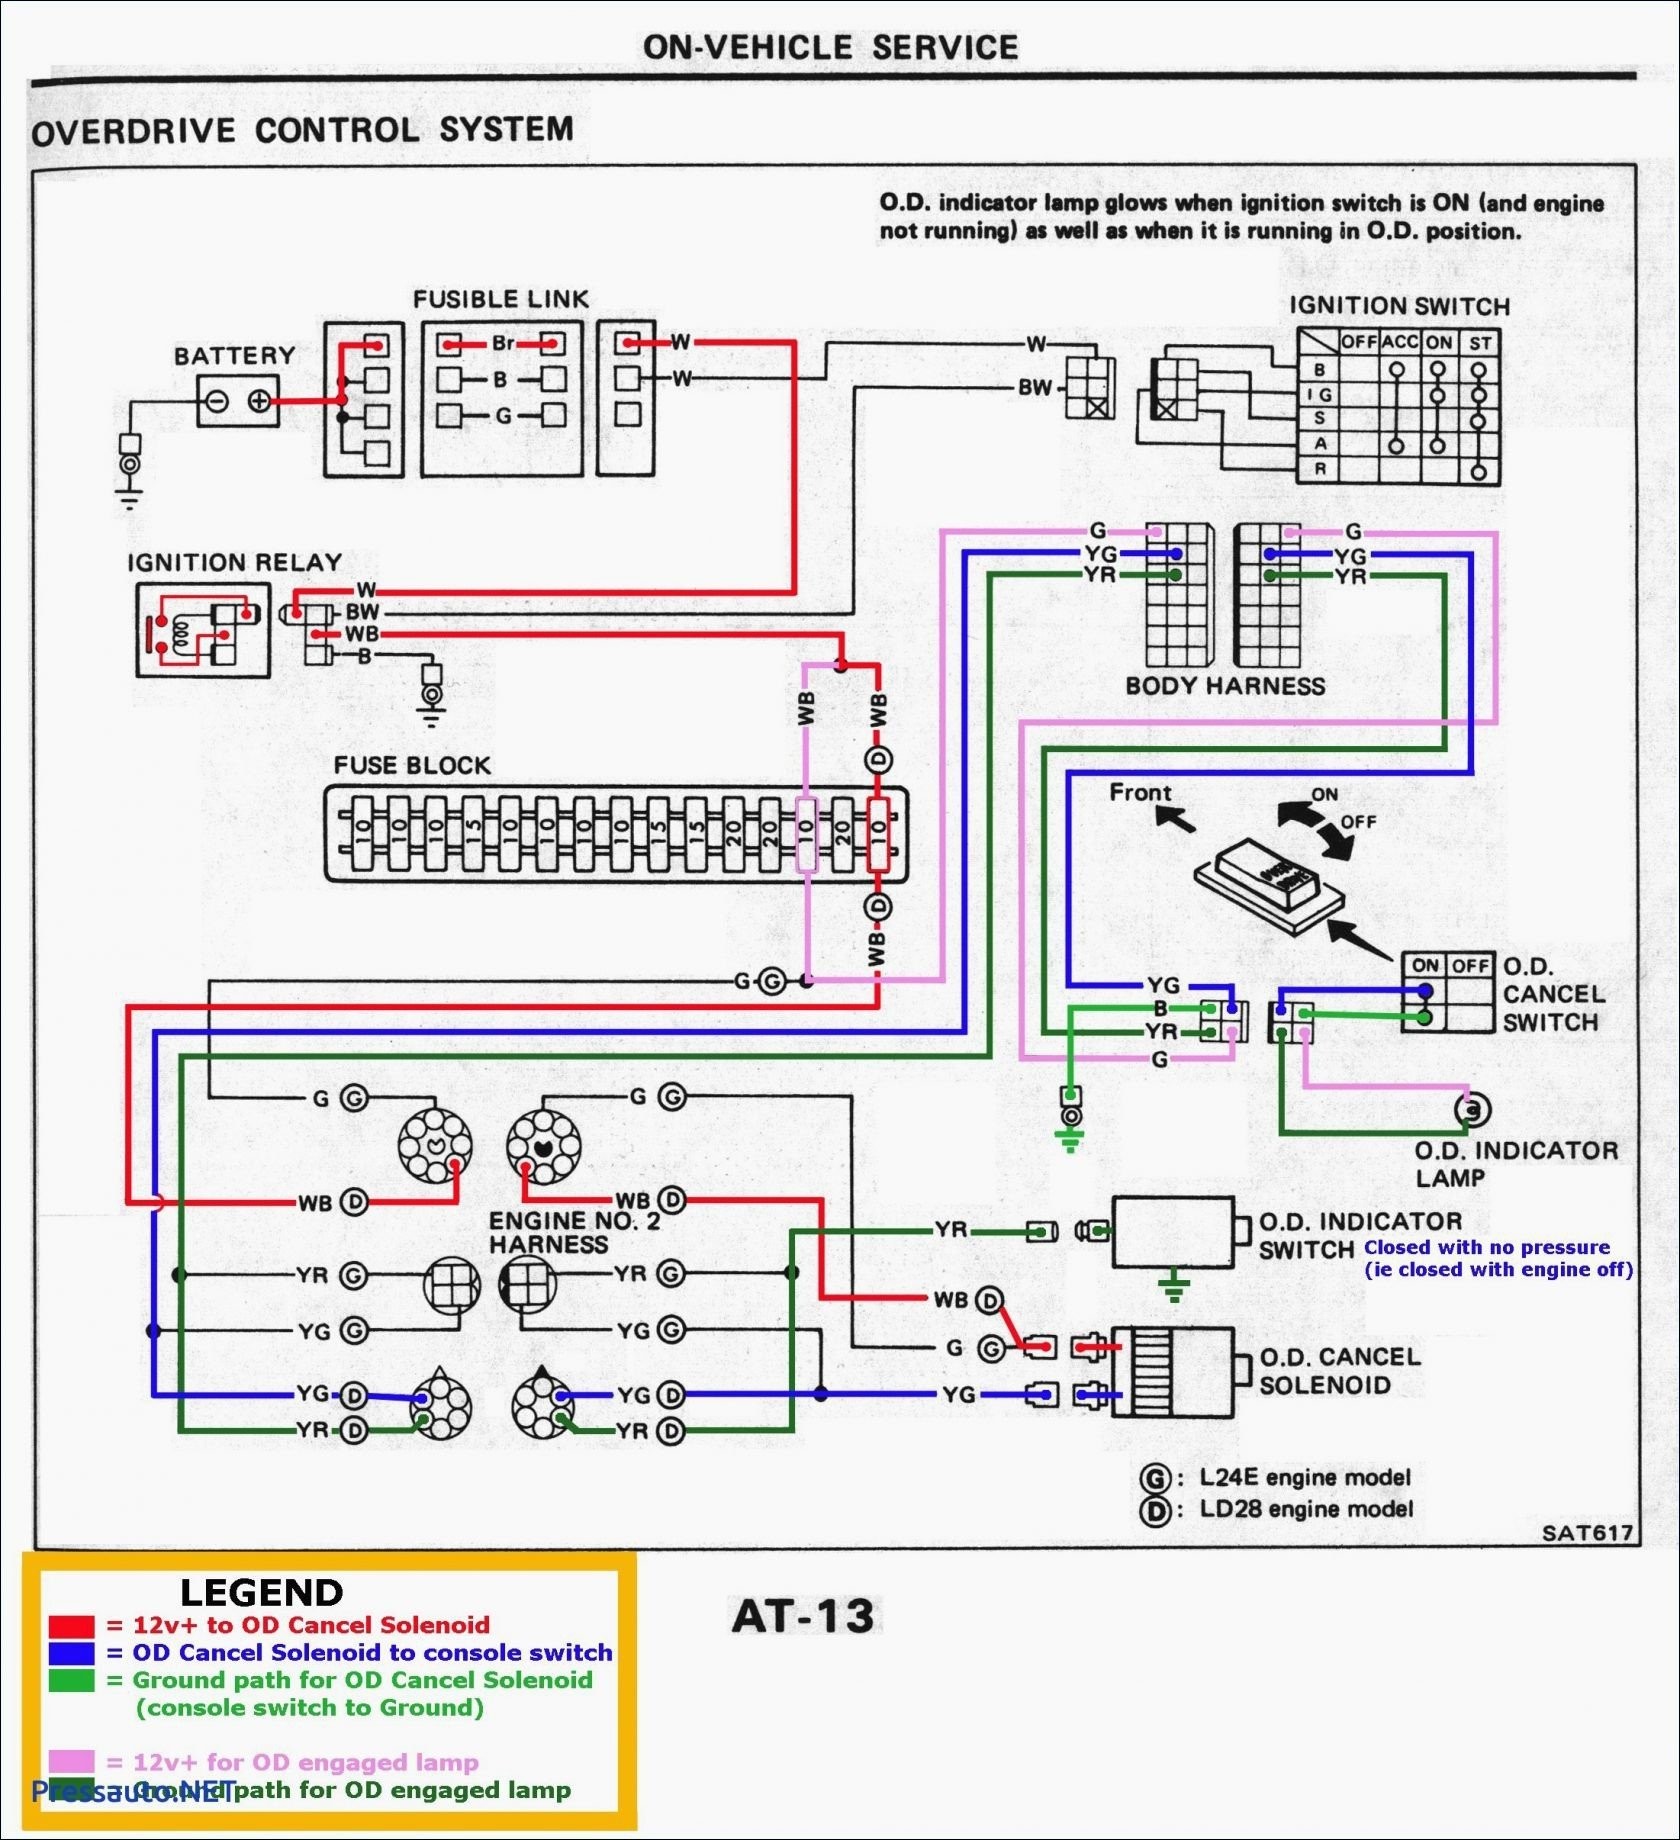 Auto Transmission Diagram Car Reverse Light Wiring Diagram Nissan Sel forums • View topic Of Auto Transmission Diagram